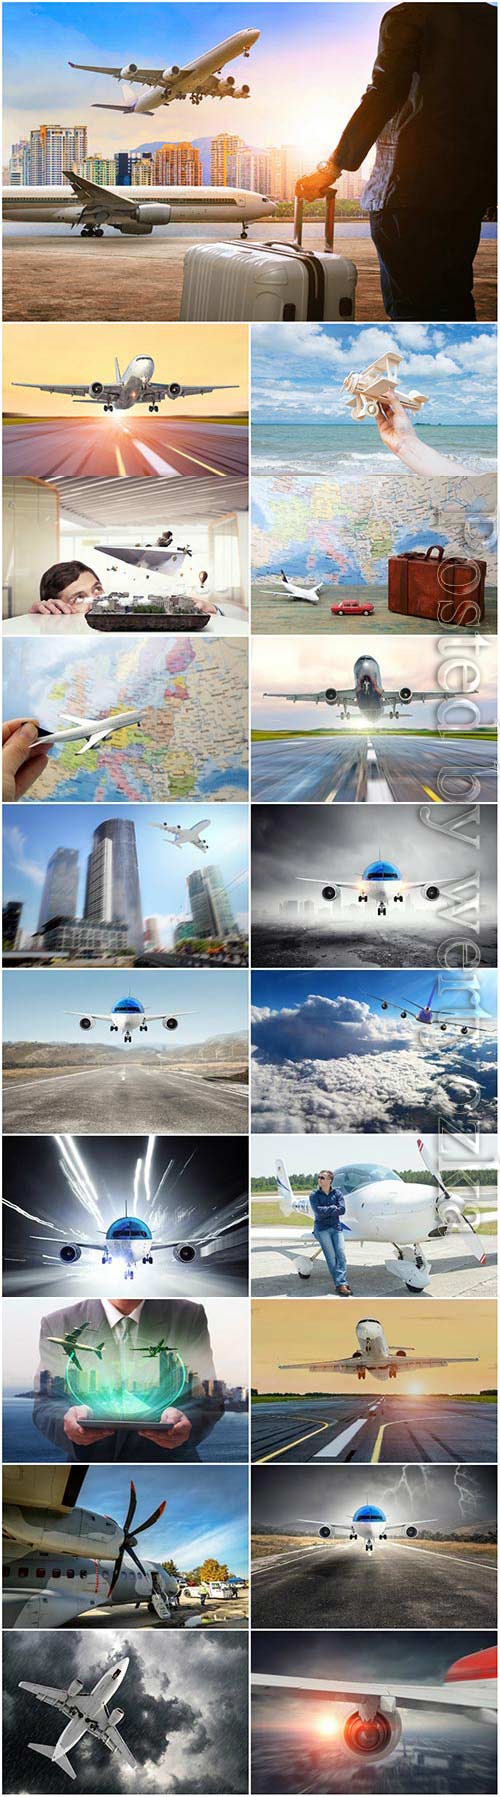 Airplanes, travel and vacation concept stock photo